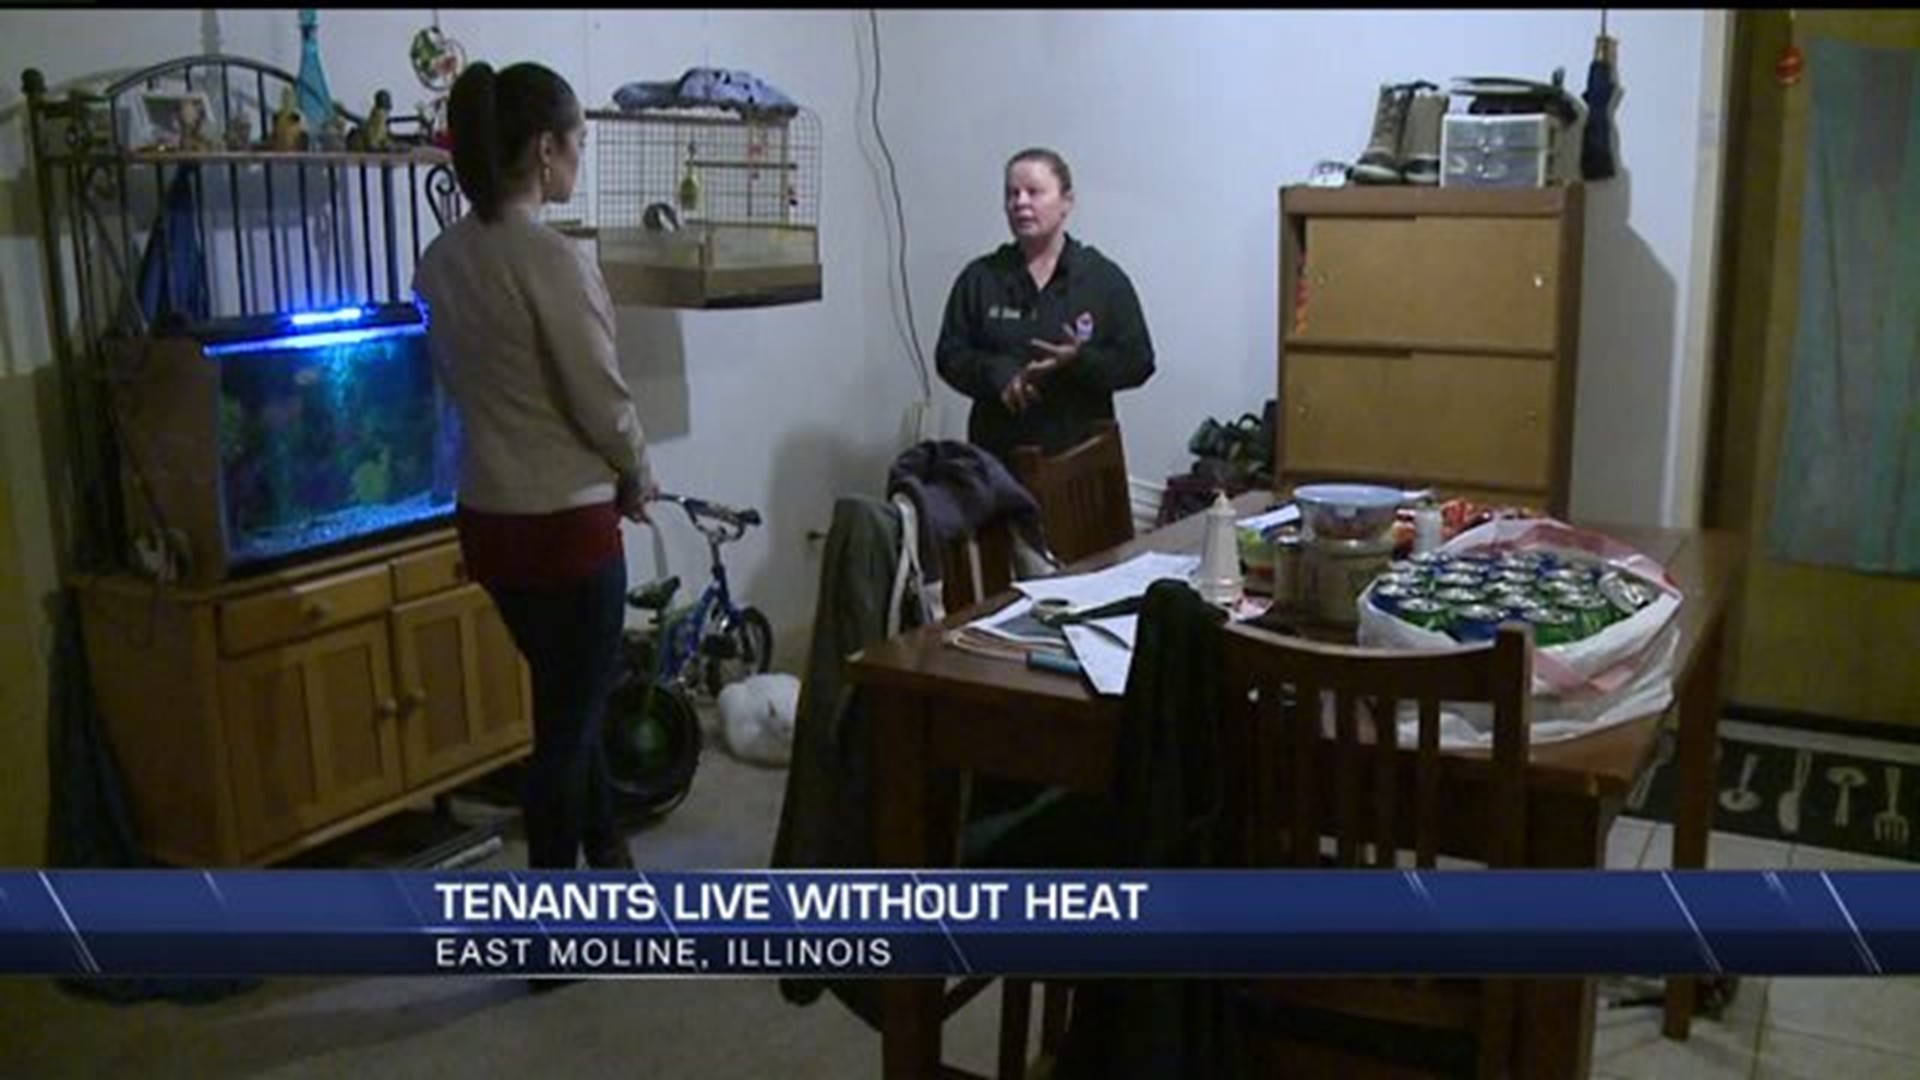 Tenants live without heat